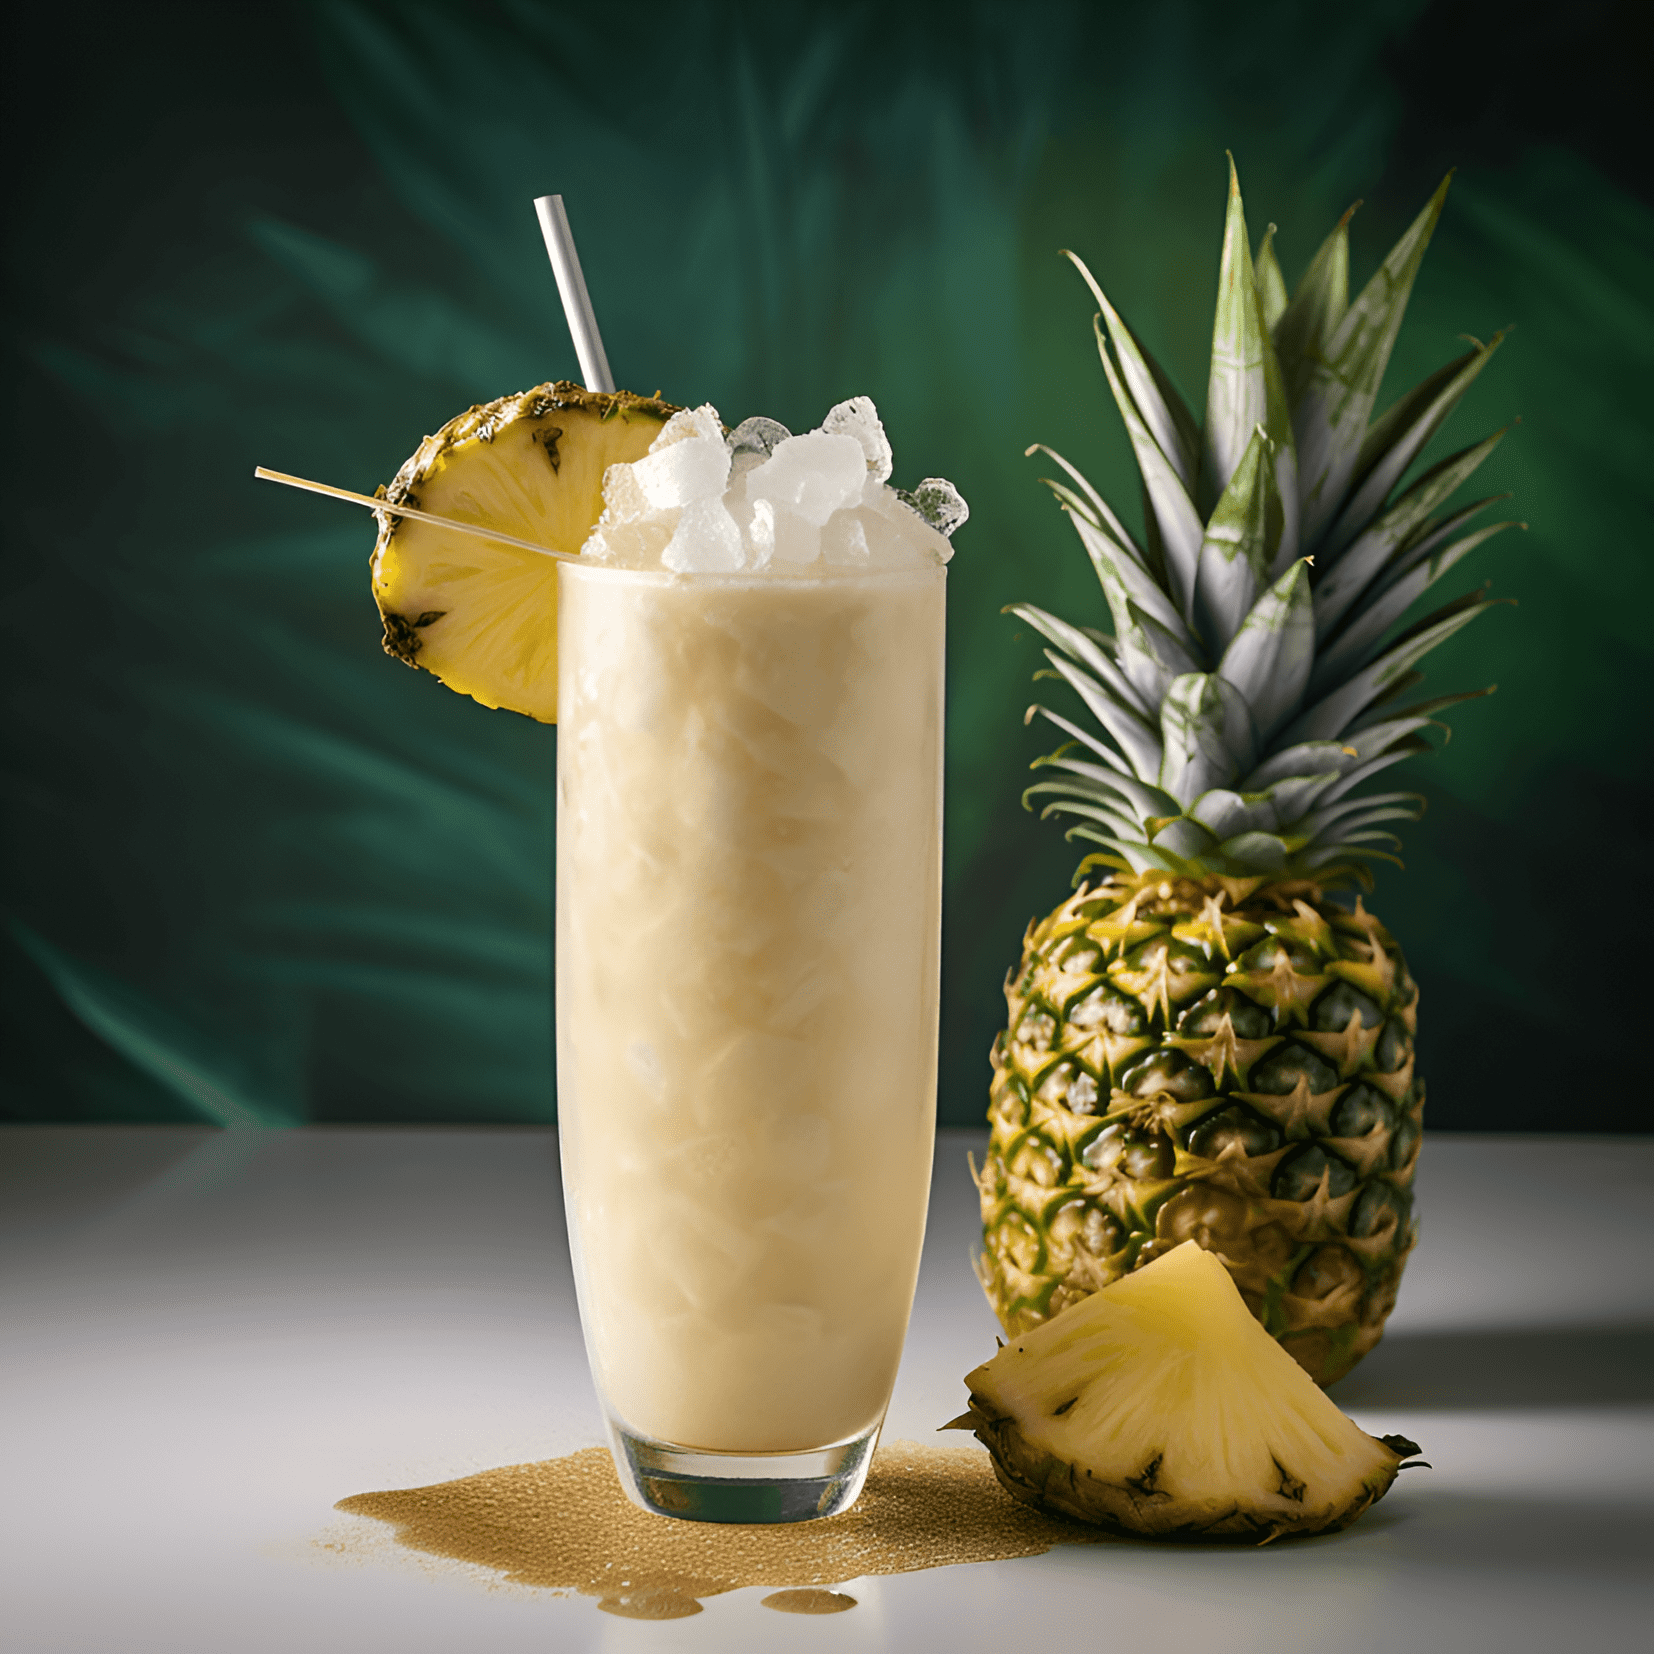 The Coconut Cooler has a sweet and creamy taste, with a hint of tartness from the pineapple juice. The coconut milk gives it a smooth and velvety texture, while the rum adds a subtle warmth and depth of flavor.